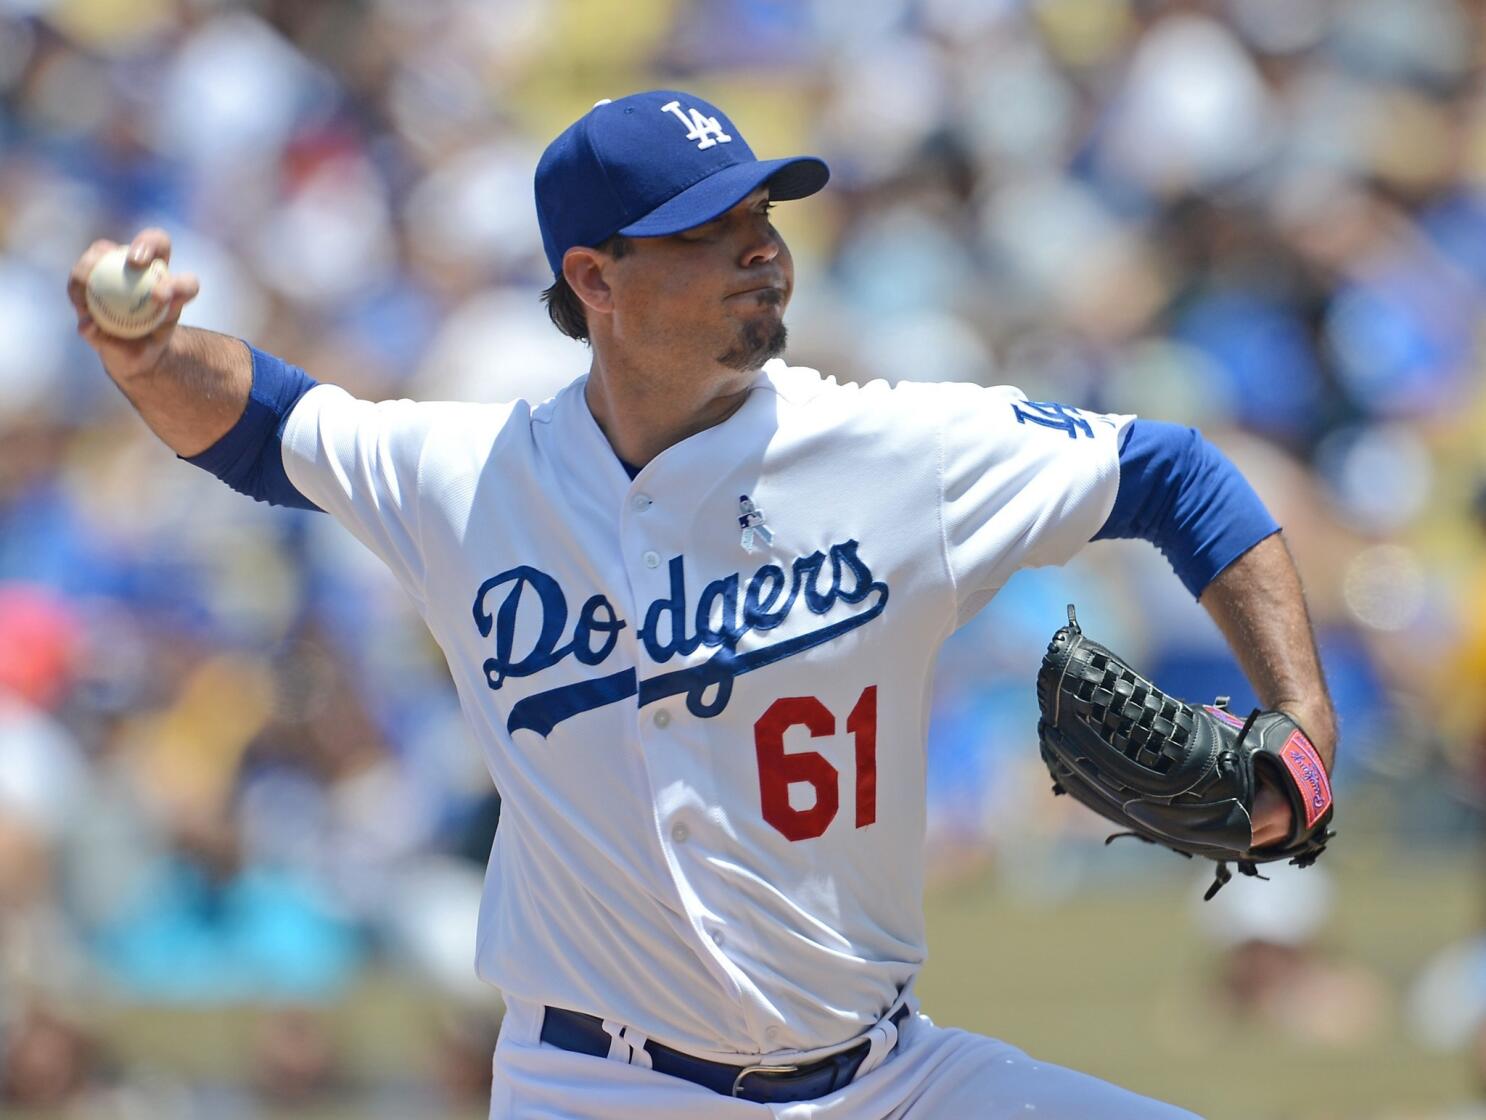 Not in Hall of Fame - 21. Josh Beckett